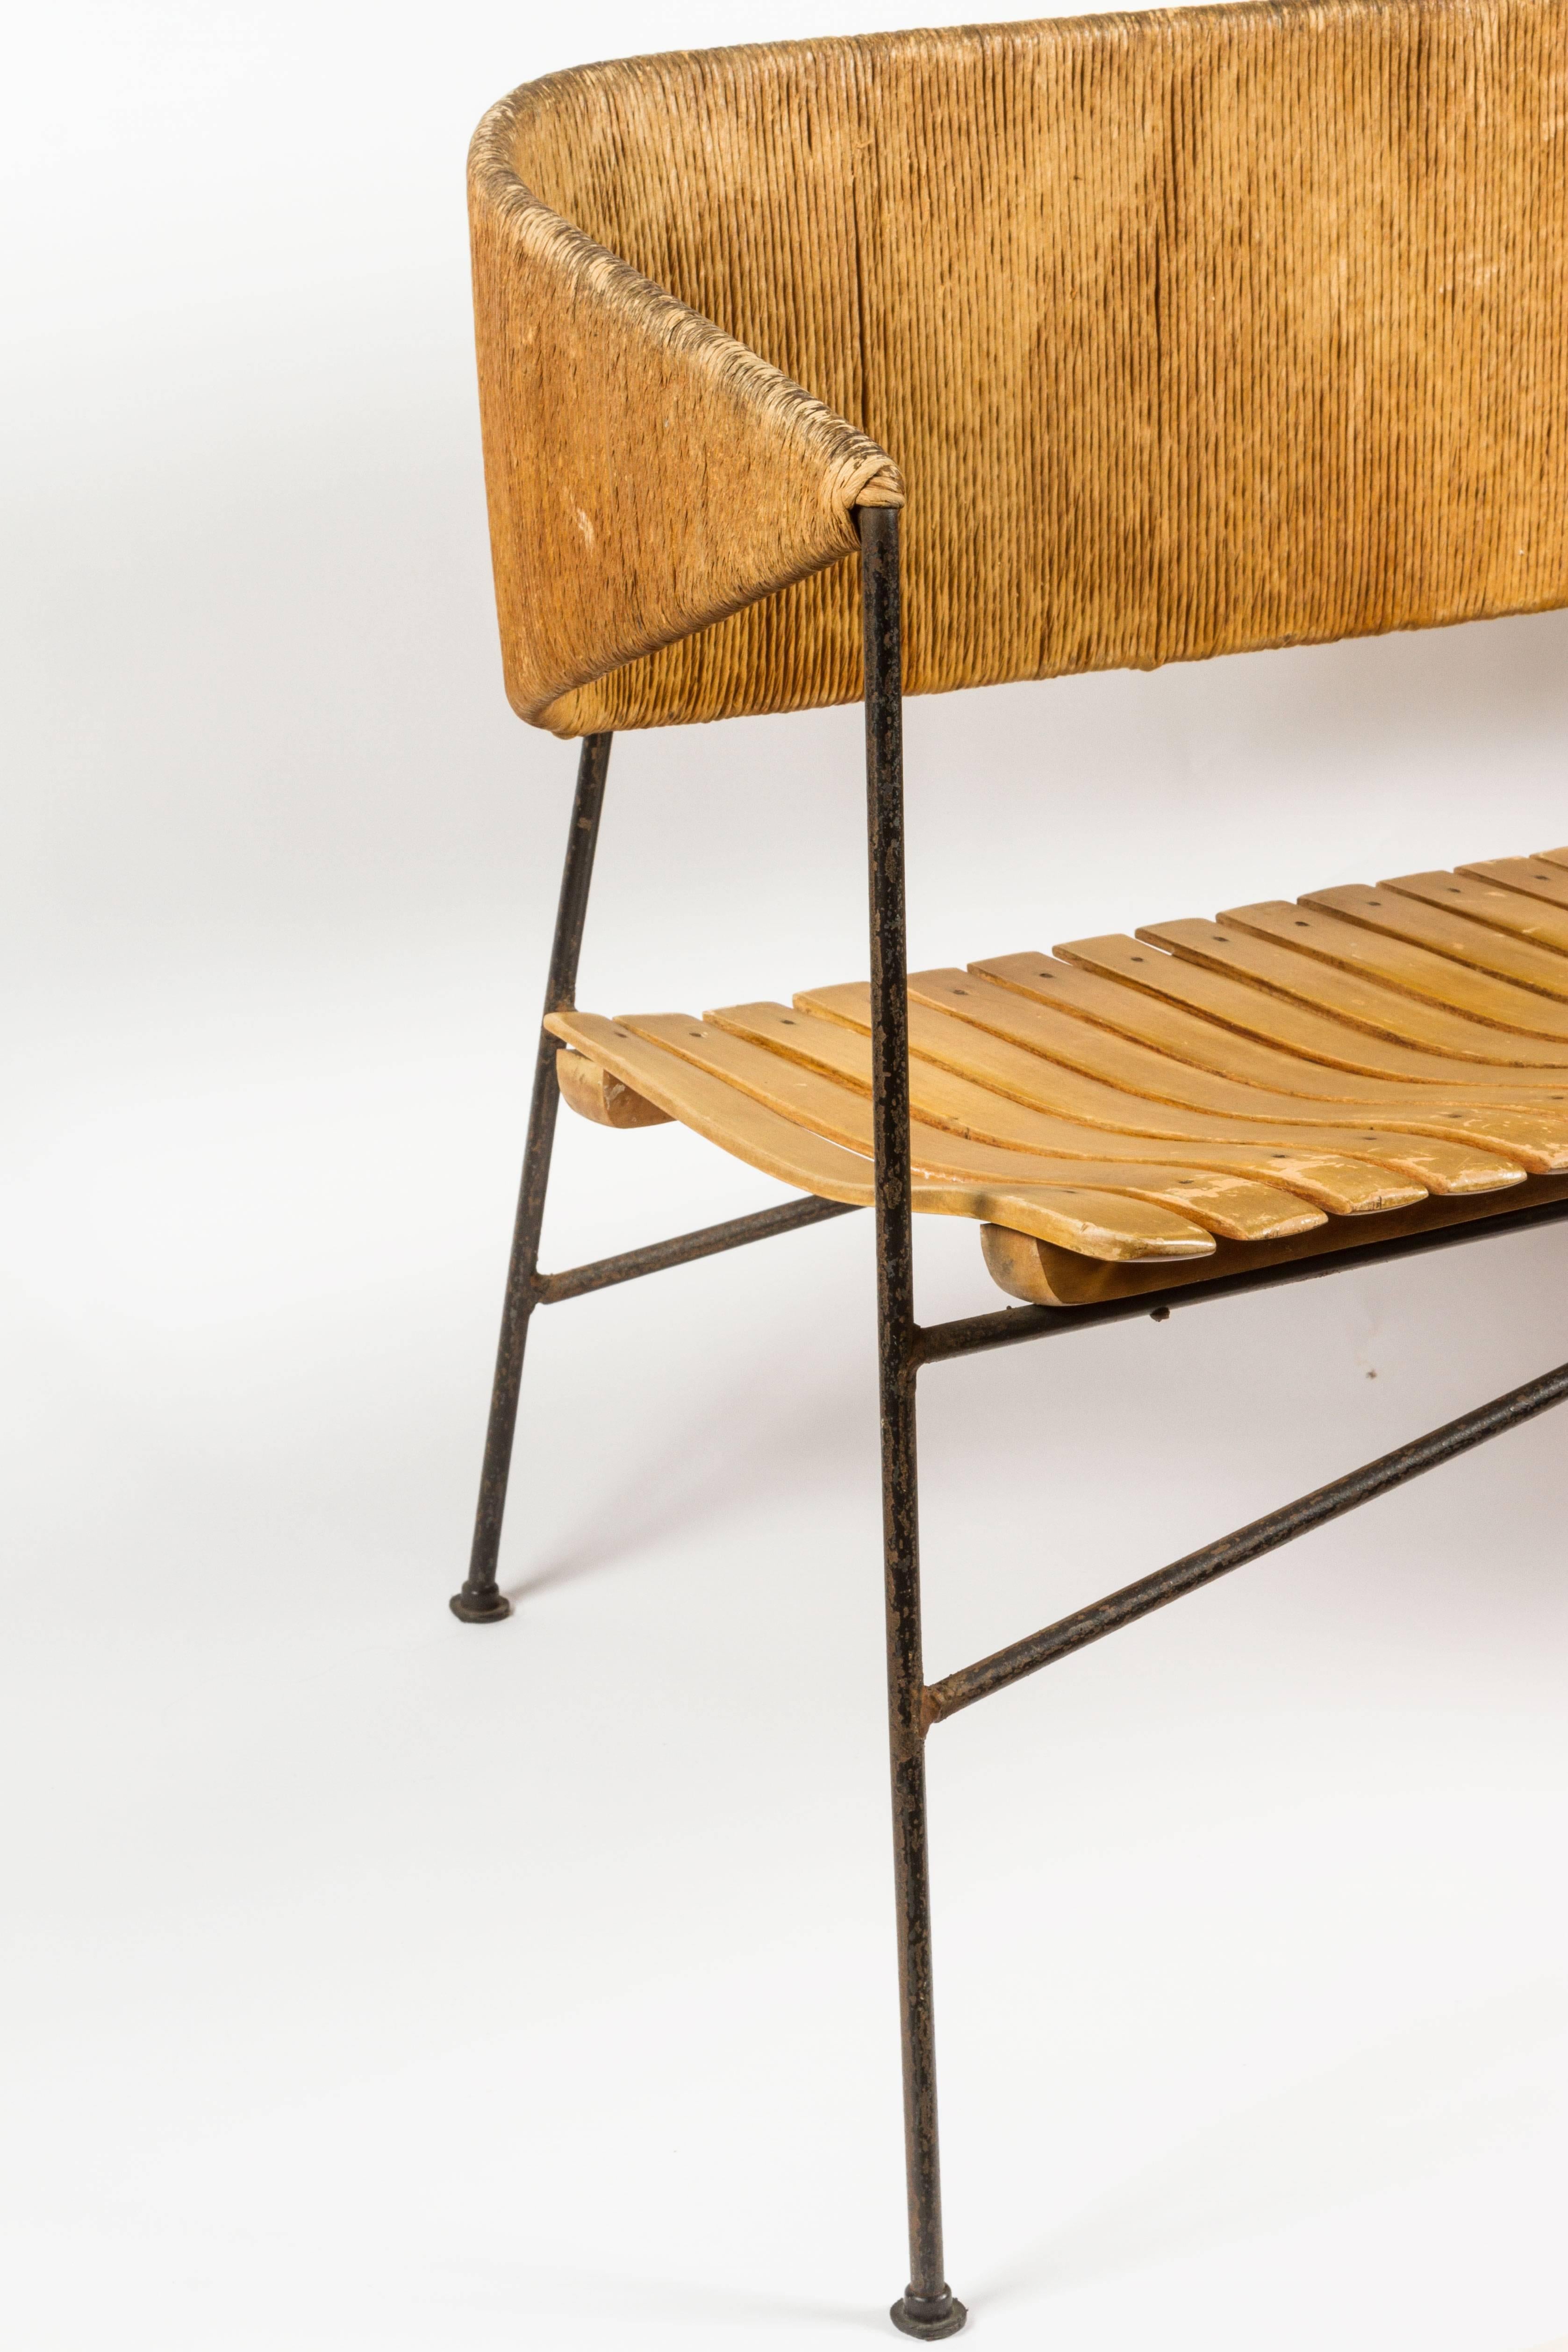 Rare iron, slatted wood and paper cord bench by Arthur Umanoff. Made in USA circa 1960s.